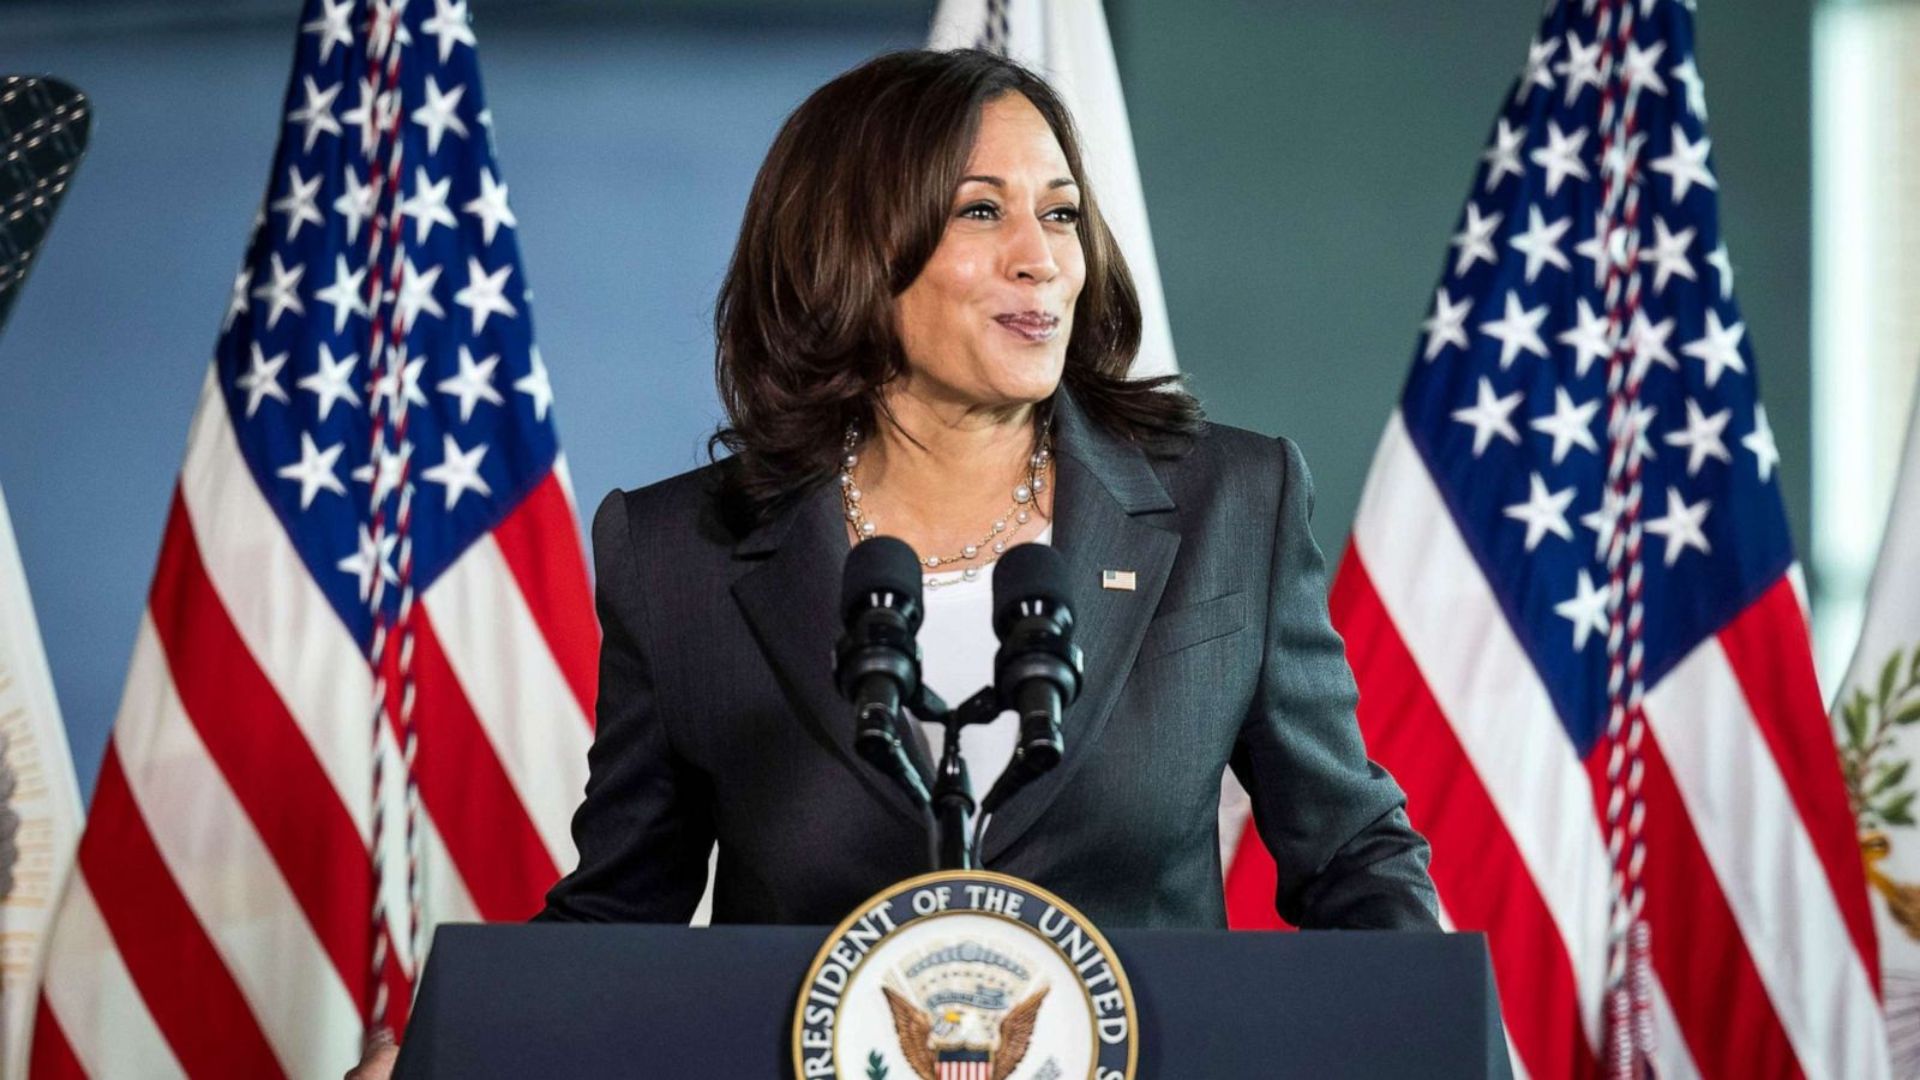 Vice President Kamala Harris announced that the administration would invest $125 Million to aid small businesses in underserved communities.